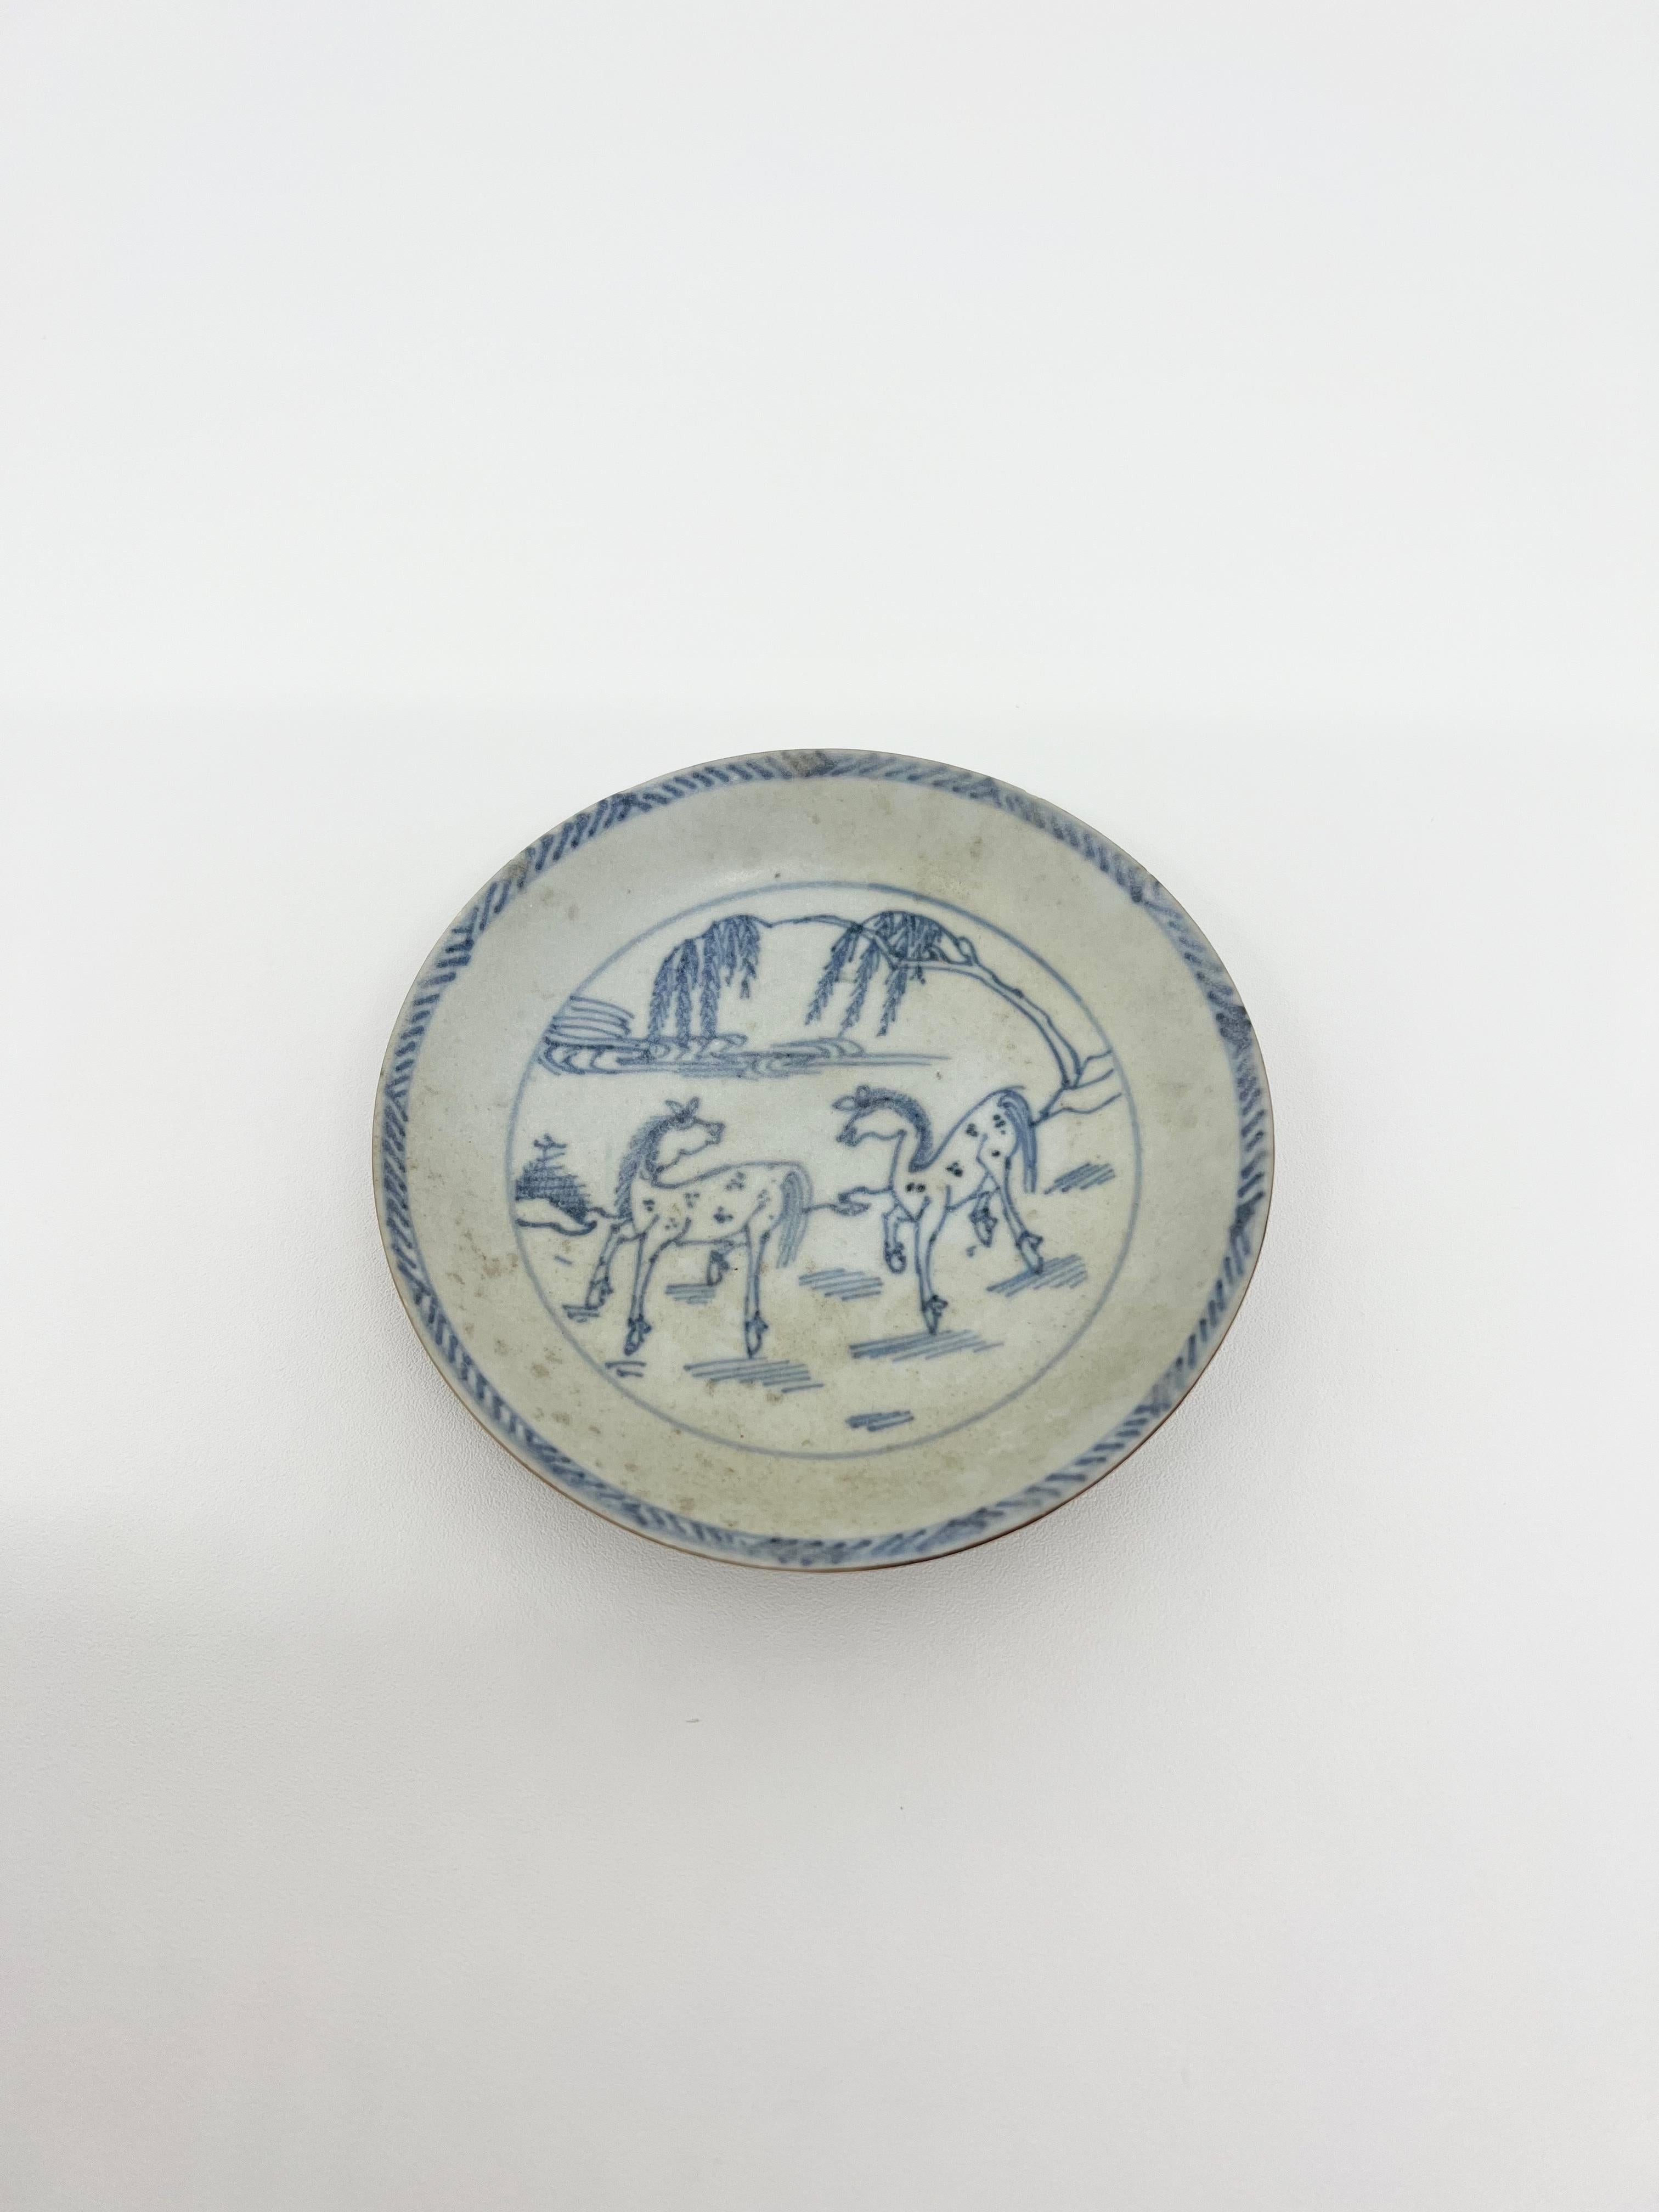 Chinese 'Spotted Horses' Pattern Blue and White Saucer c1725, Qing Dynasty, Yongzheng For Sale